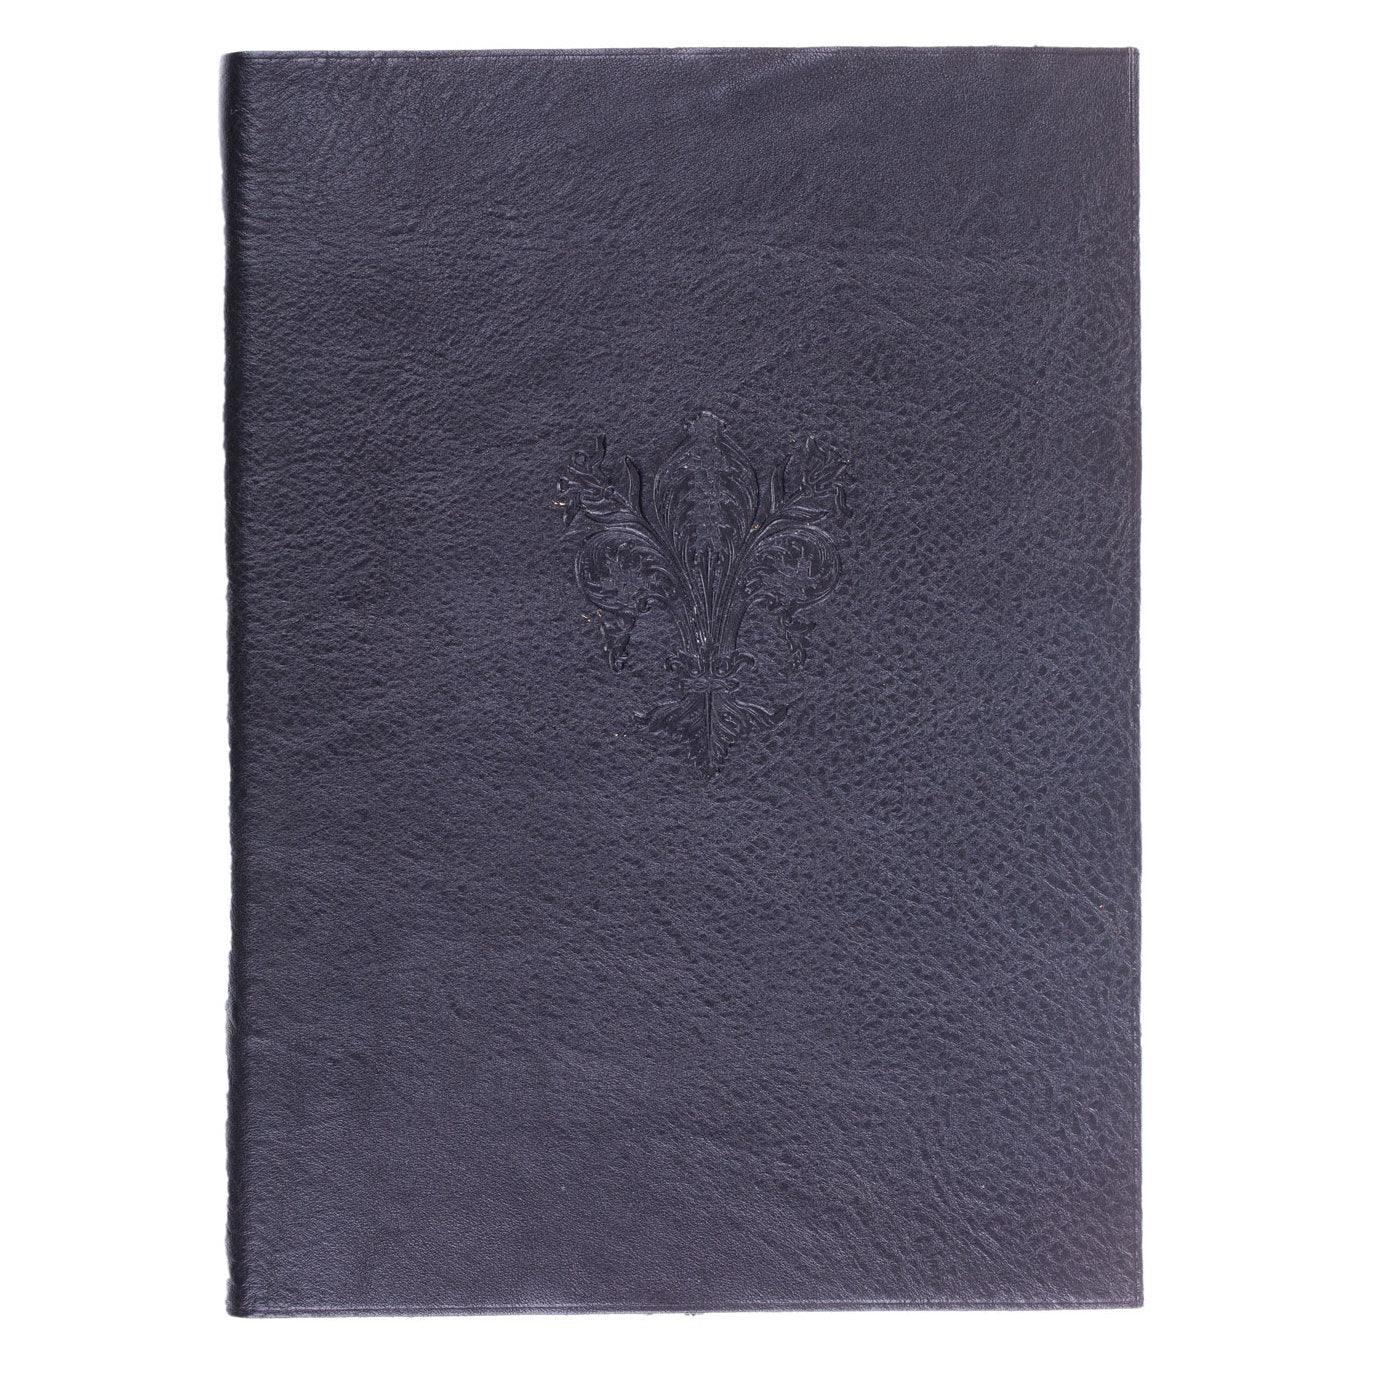 Lily Black Leather Notebook - Alternative view 2